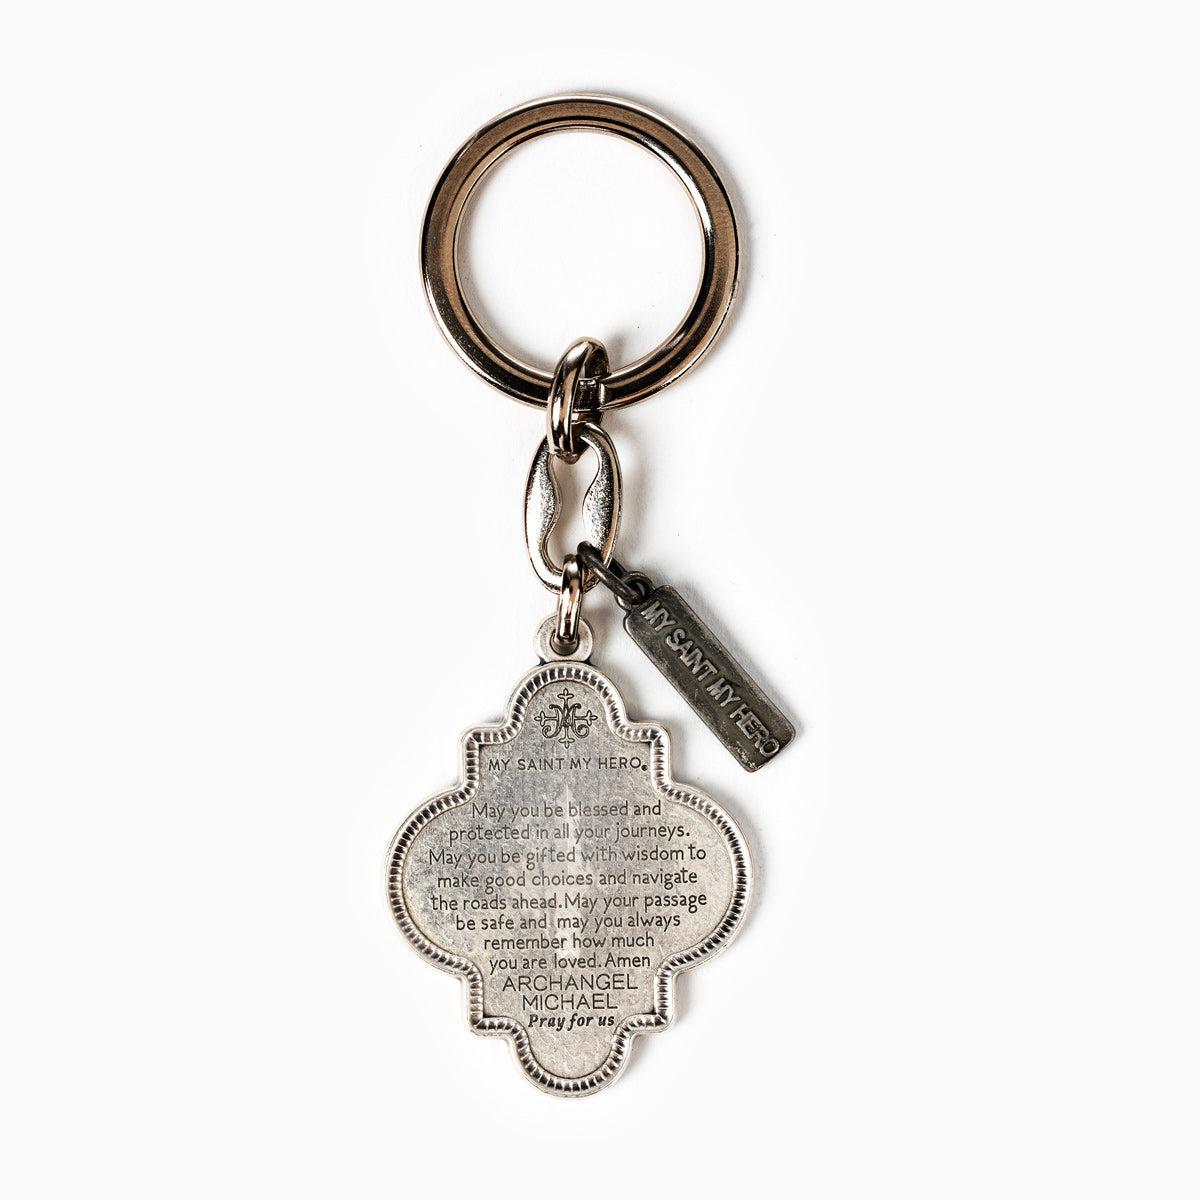 Archangel Michael Armor of Protection Key Ring